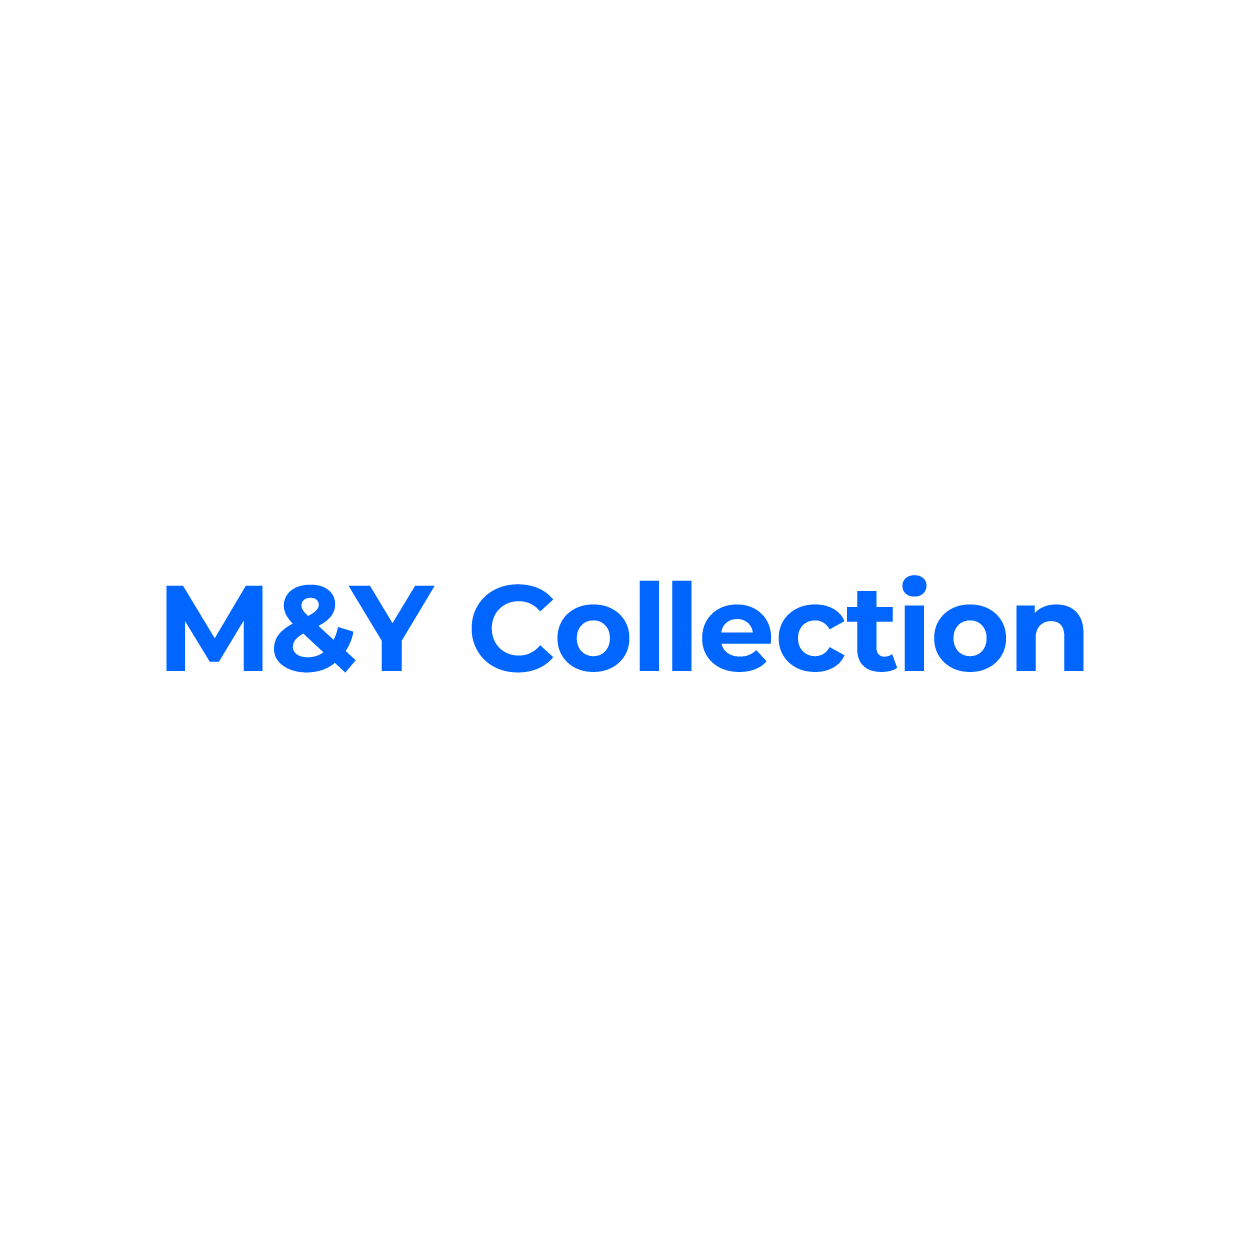 M&Y collection